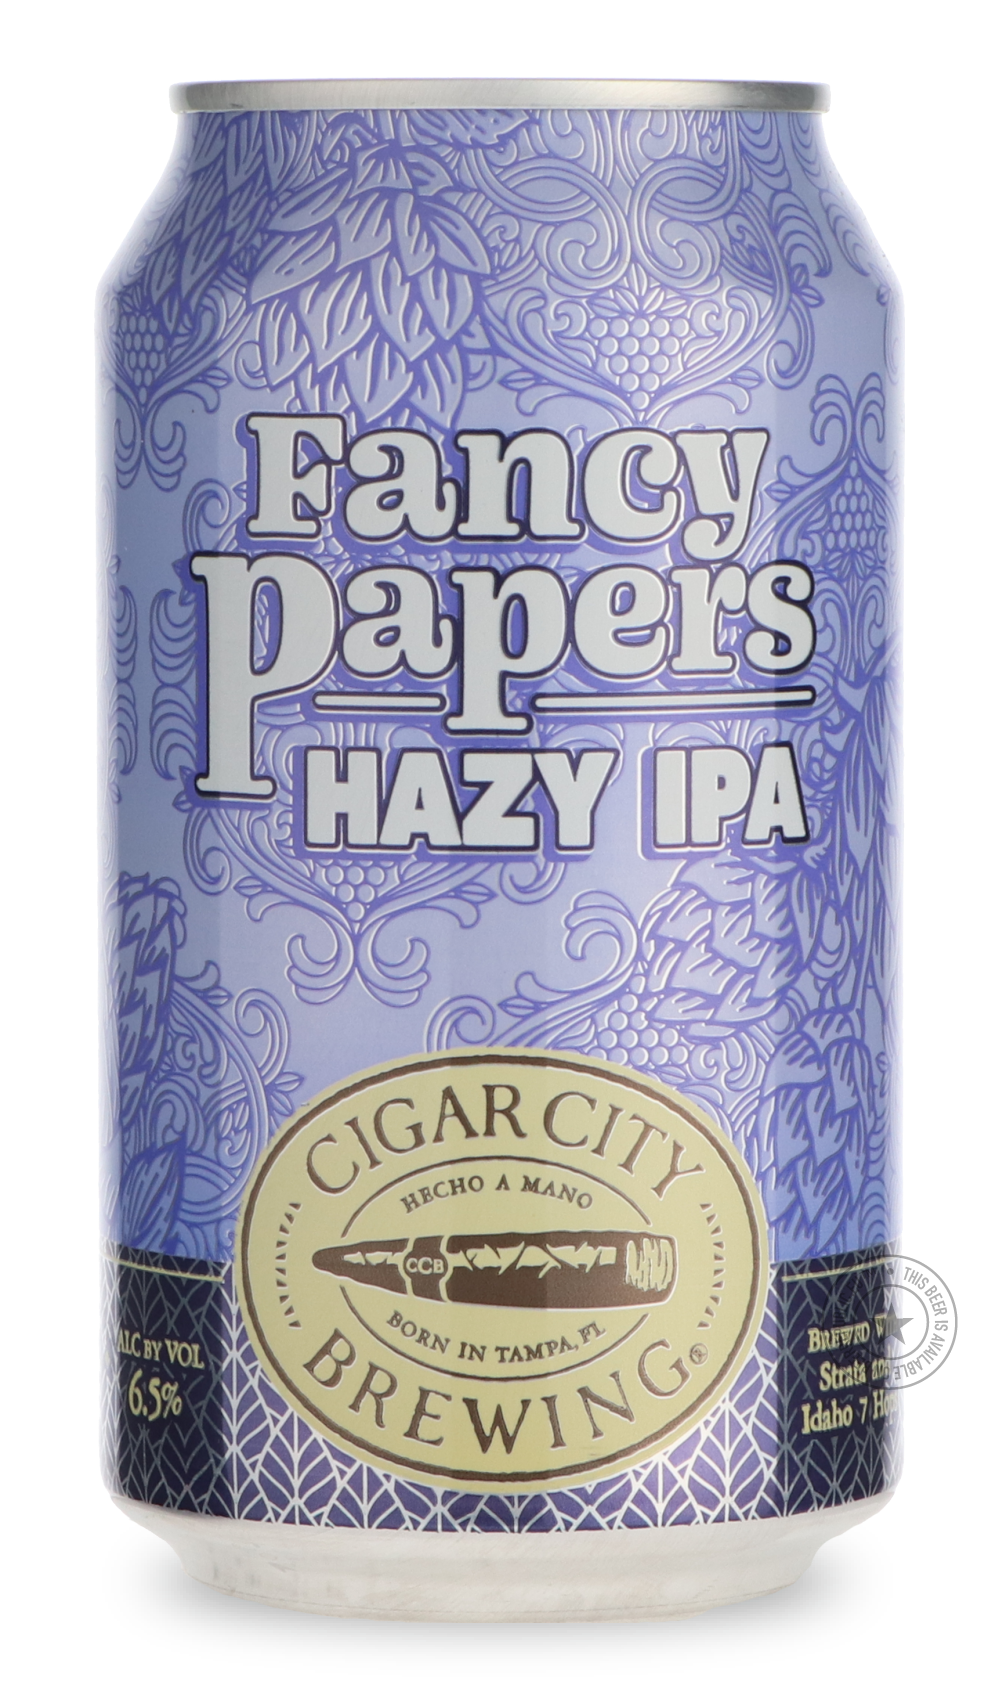 -Cigar City- Fancy Papers™-IPA- Only @ Beer Republic - The best online beer store for American & Canadian craft beer - Buy beer online from the USA and Canada - Bier online kopen - Amerikaans bier kopen - Craft beer store - Craft beer kopen - Amerikanisch bier kaufen - Bier online kaufen - Acheter biere online - IPA - Stout - Porter - New England IPA - Hazy IPA - Imperial Stout - Barrel Aged - Barrel Aged Imperial Stout - Brown - Dark beer - Blond - Blonde - Pilsner - Lager - Wheat - Weizen - Amber - Barley